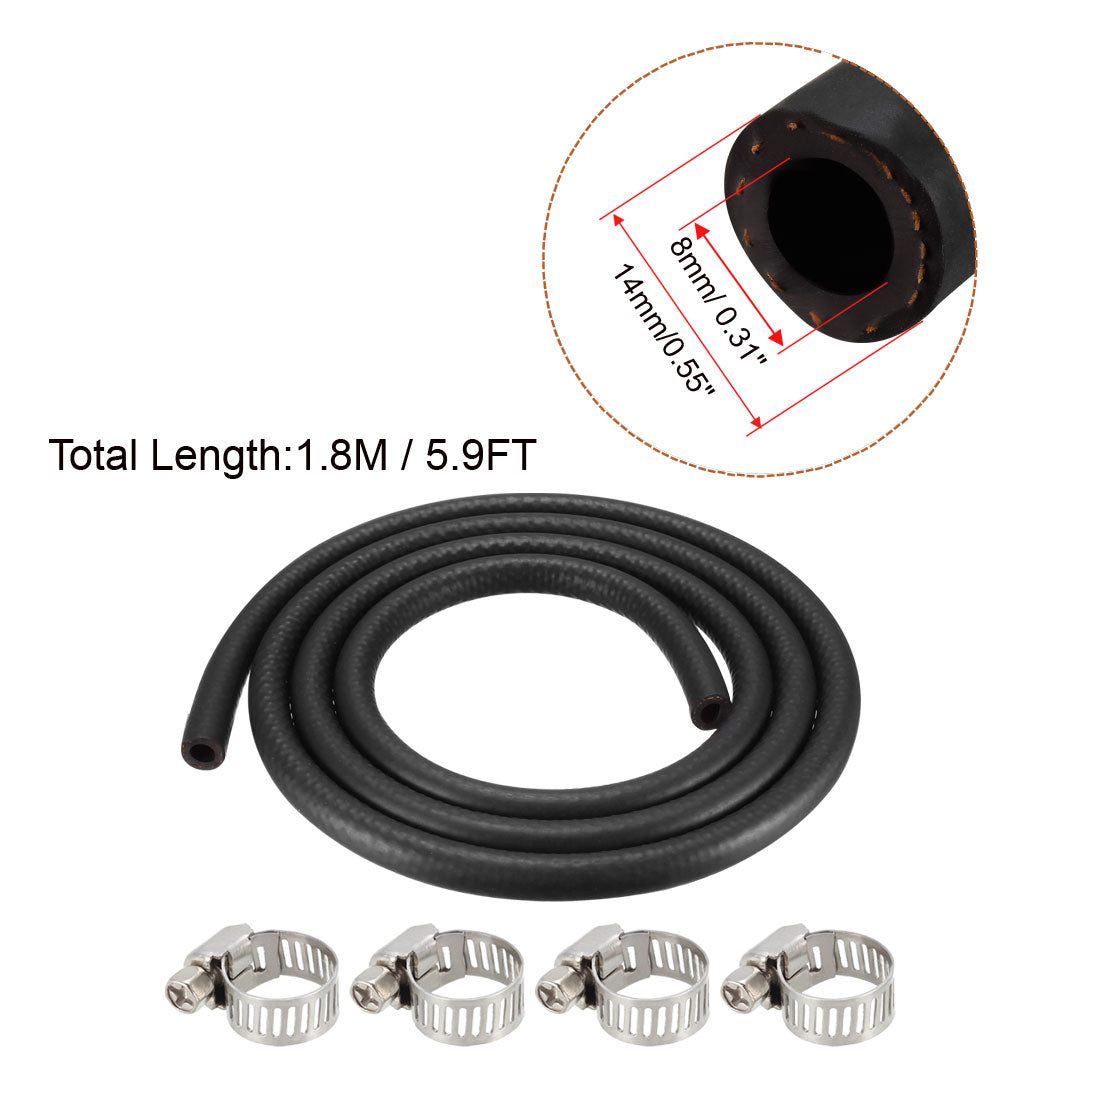 uxcell Uxcell Fuel Line Fuel Hose Rubber  8mm I.D.  1.8M/5.9FT  Diesel Petrol Hose Engine Pipe Tubing with 4 Clamps